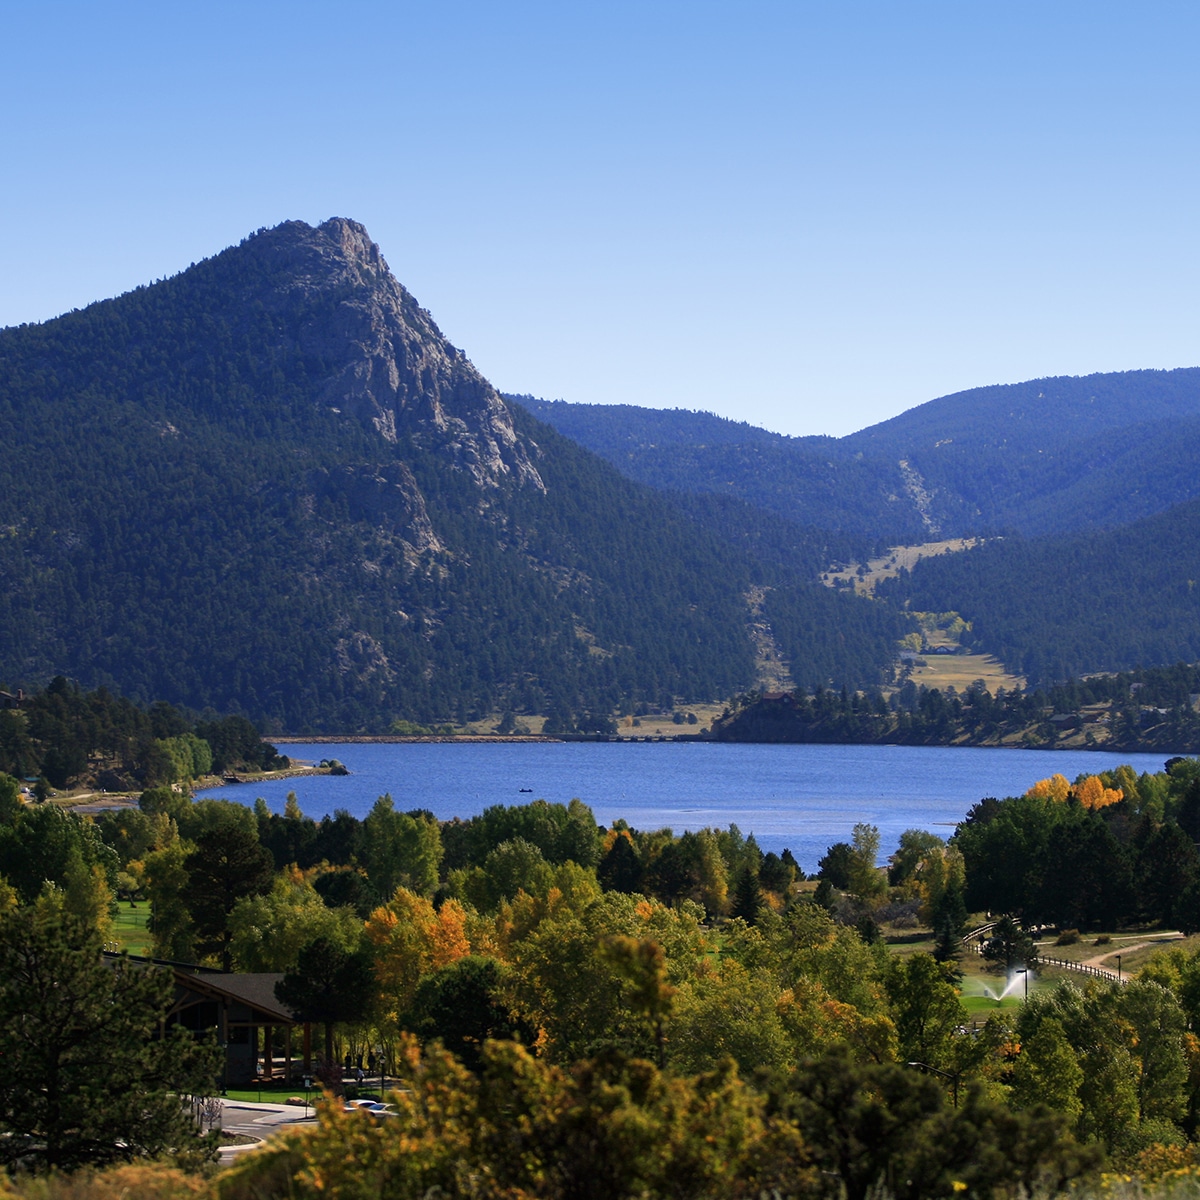 Lake Estes in Estes Park Colorado on a sunny day without any clouds in the sky.